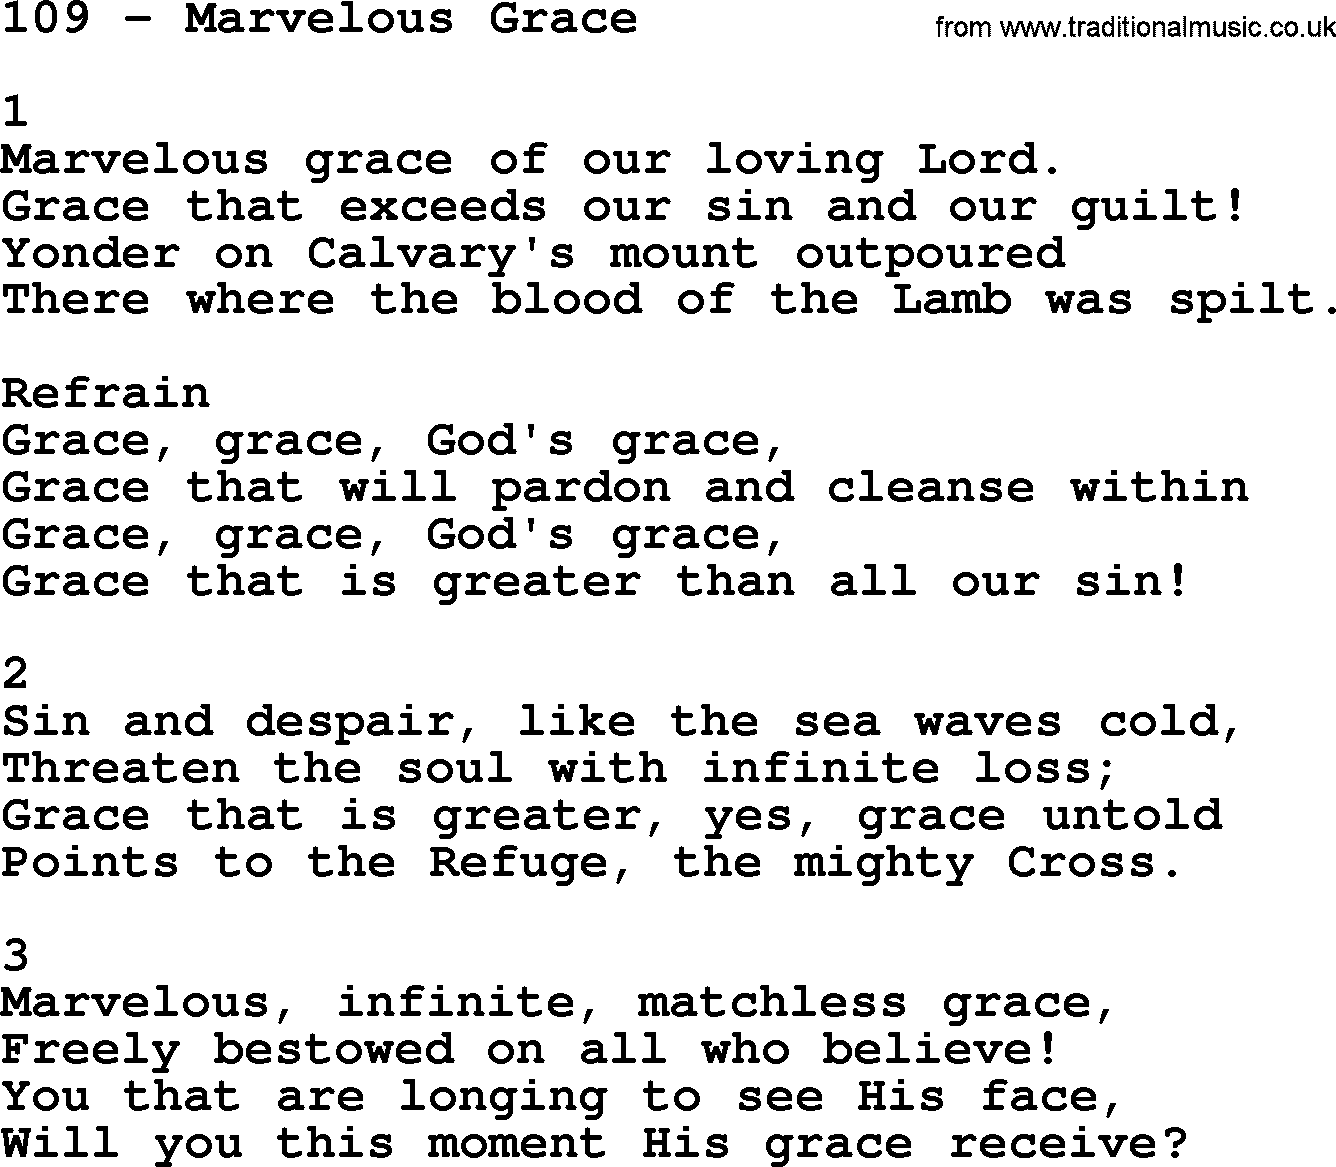 Complete Adventis Hymnal, title: 109-Marvelous Grace, with lyrics, midi, mp3, powerpoints(PPT) and PDF,